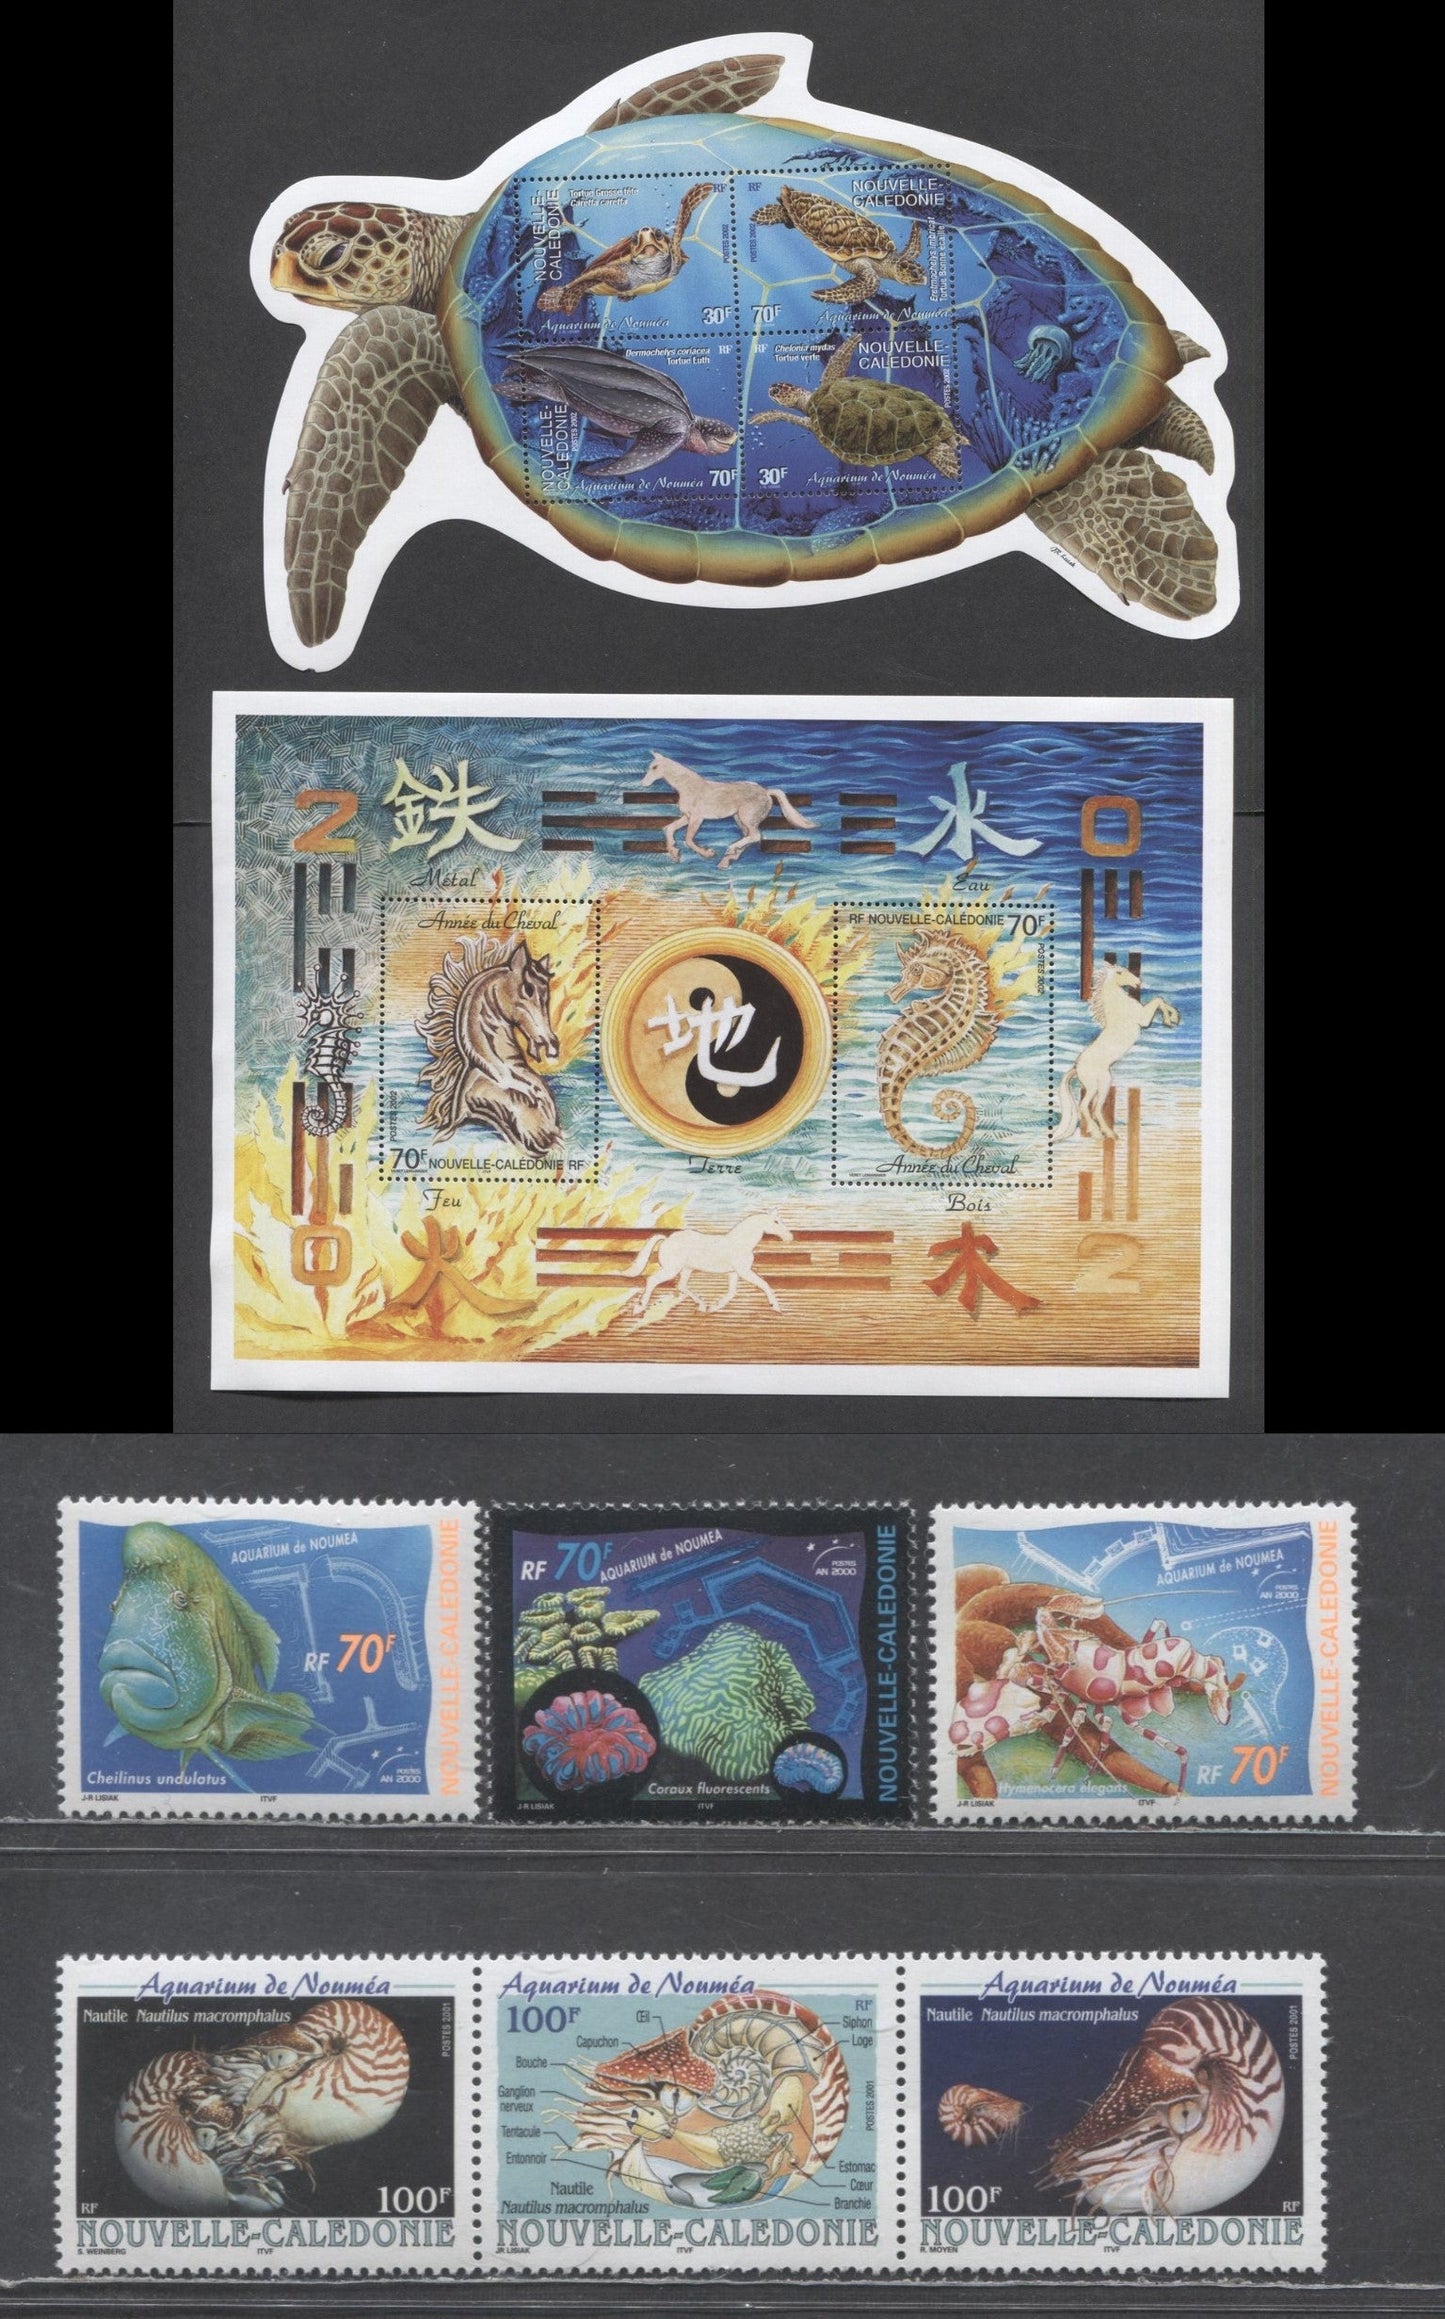 Lot 125 New Caledonia SC#849/899 2000-2002 Noumea Aquarium, Year Of The Horse & Turtles Issues, 6 VFNH Singles & Souvenir Sheets, Click on Listing to See ALL Pictures, 2017 Scott Cat. $20.25